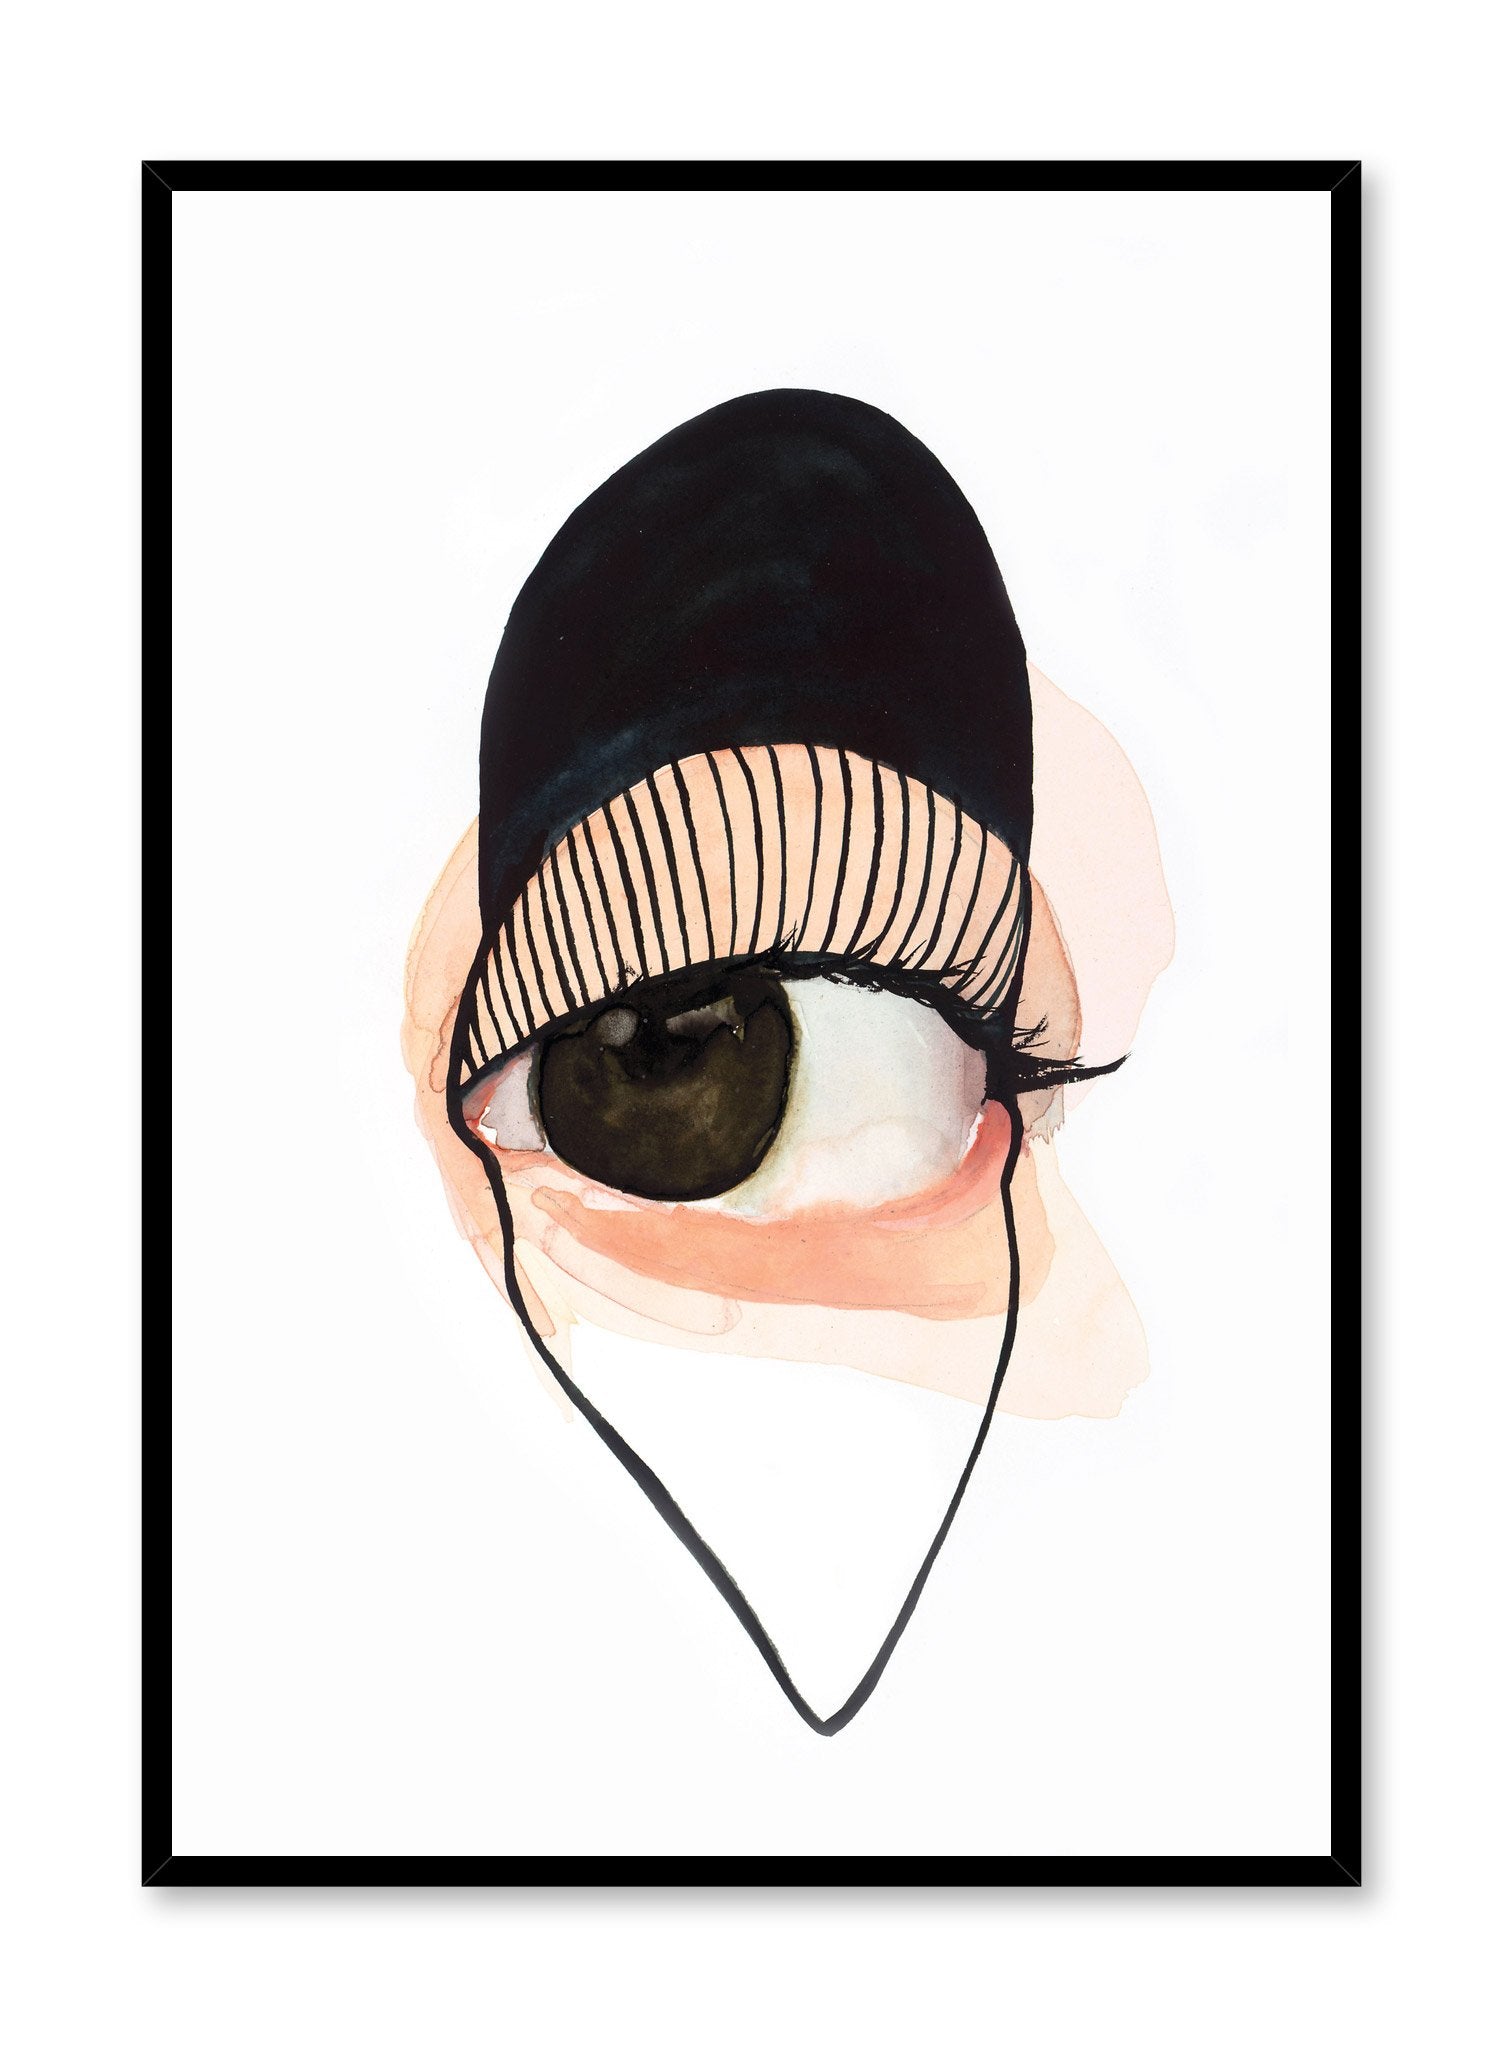 Fashion illustration poster by Opposite Wall with close up of eye